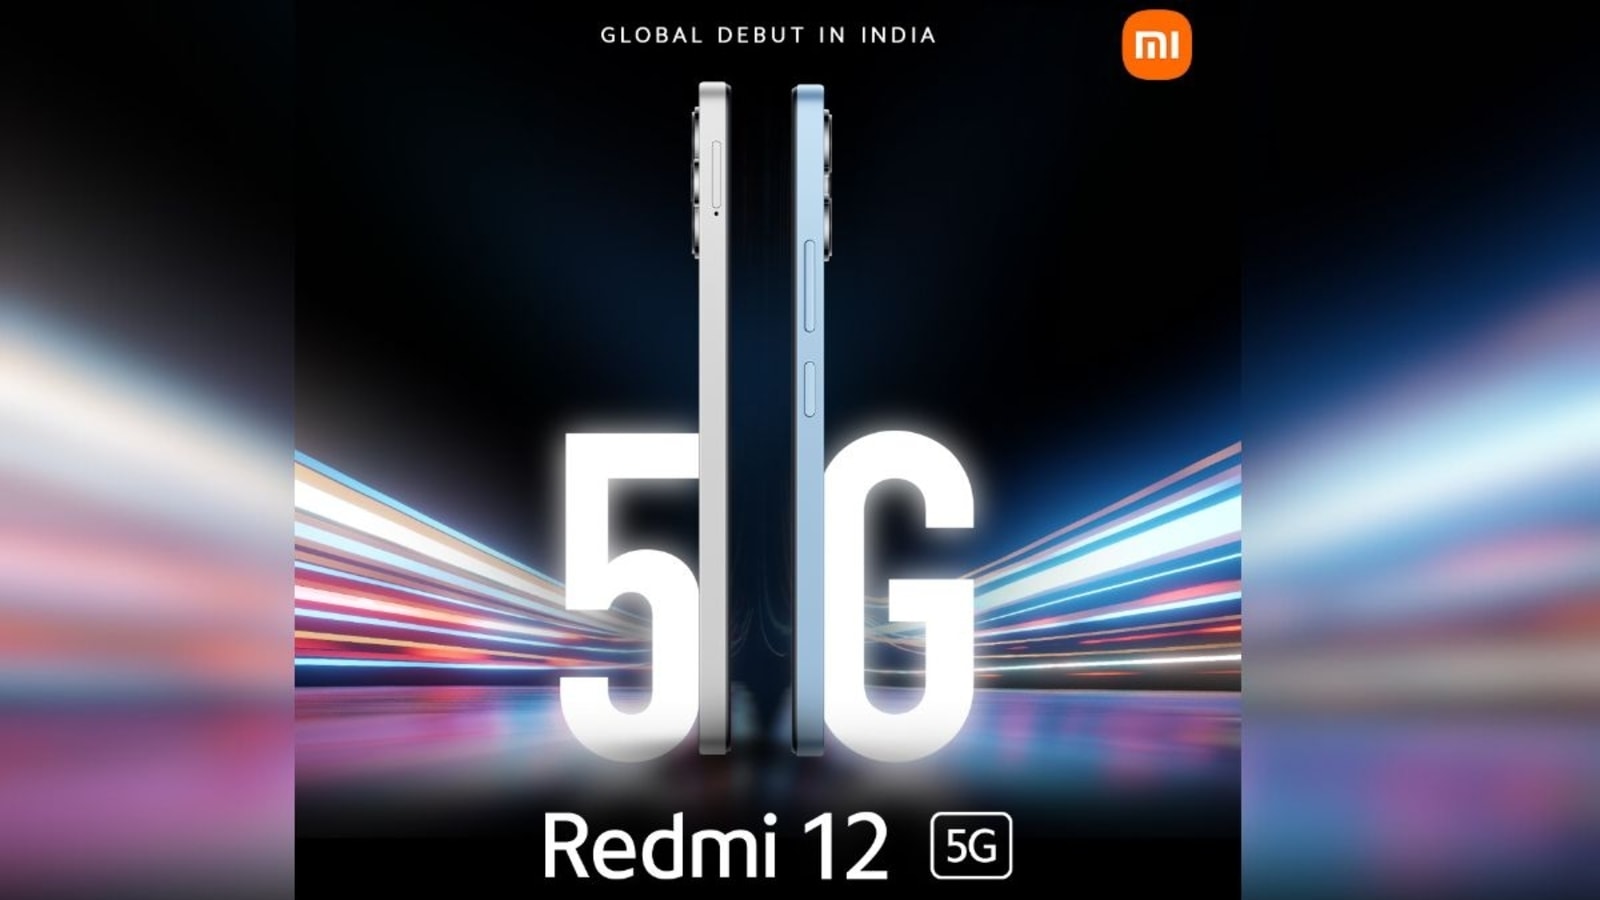 Redmi 12 5G launch date in India confirmed - Check expected specifications